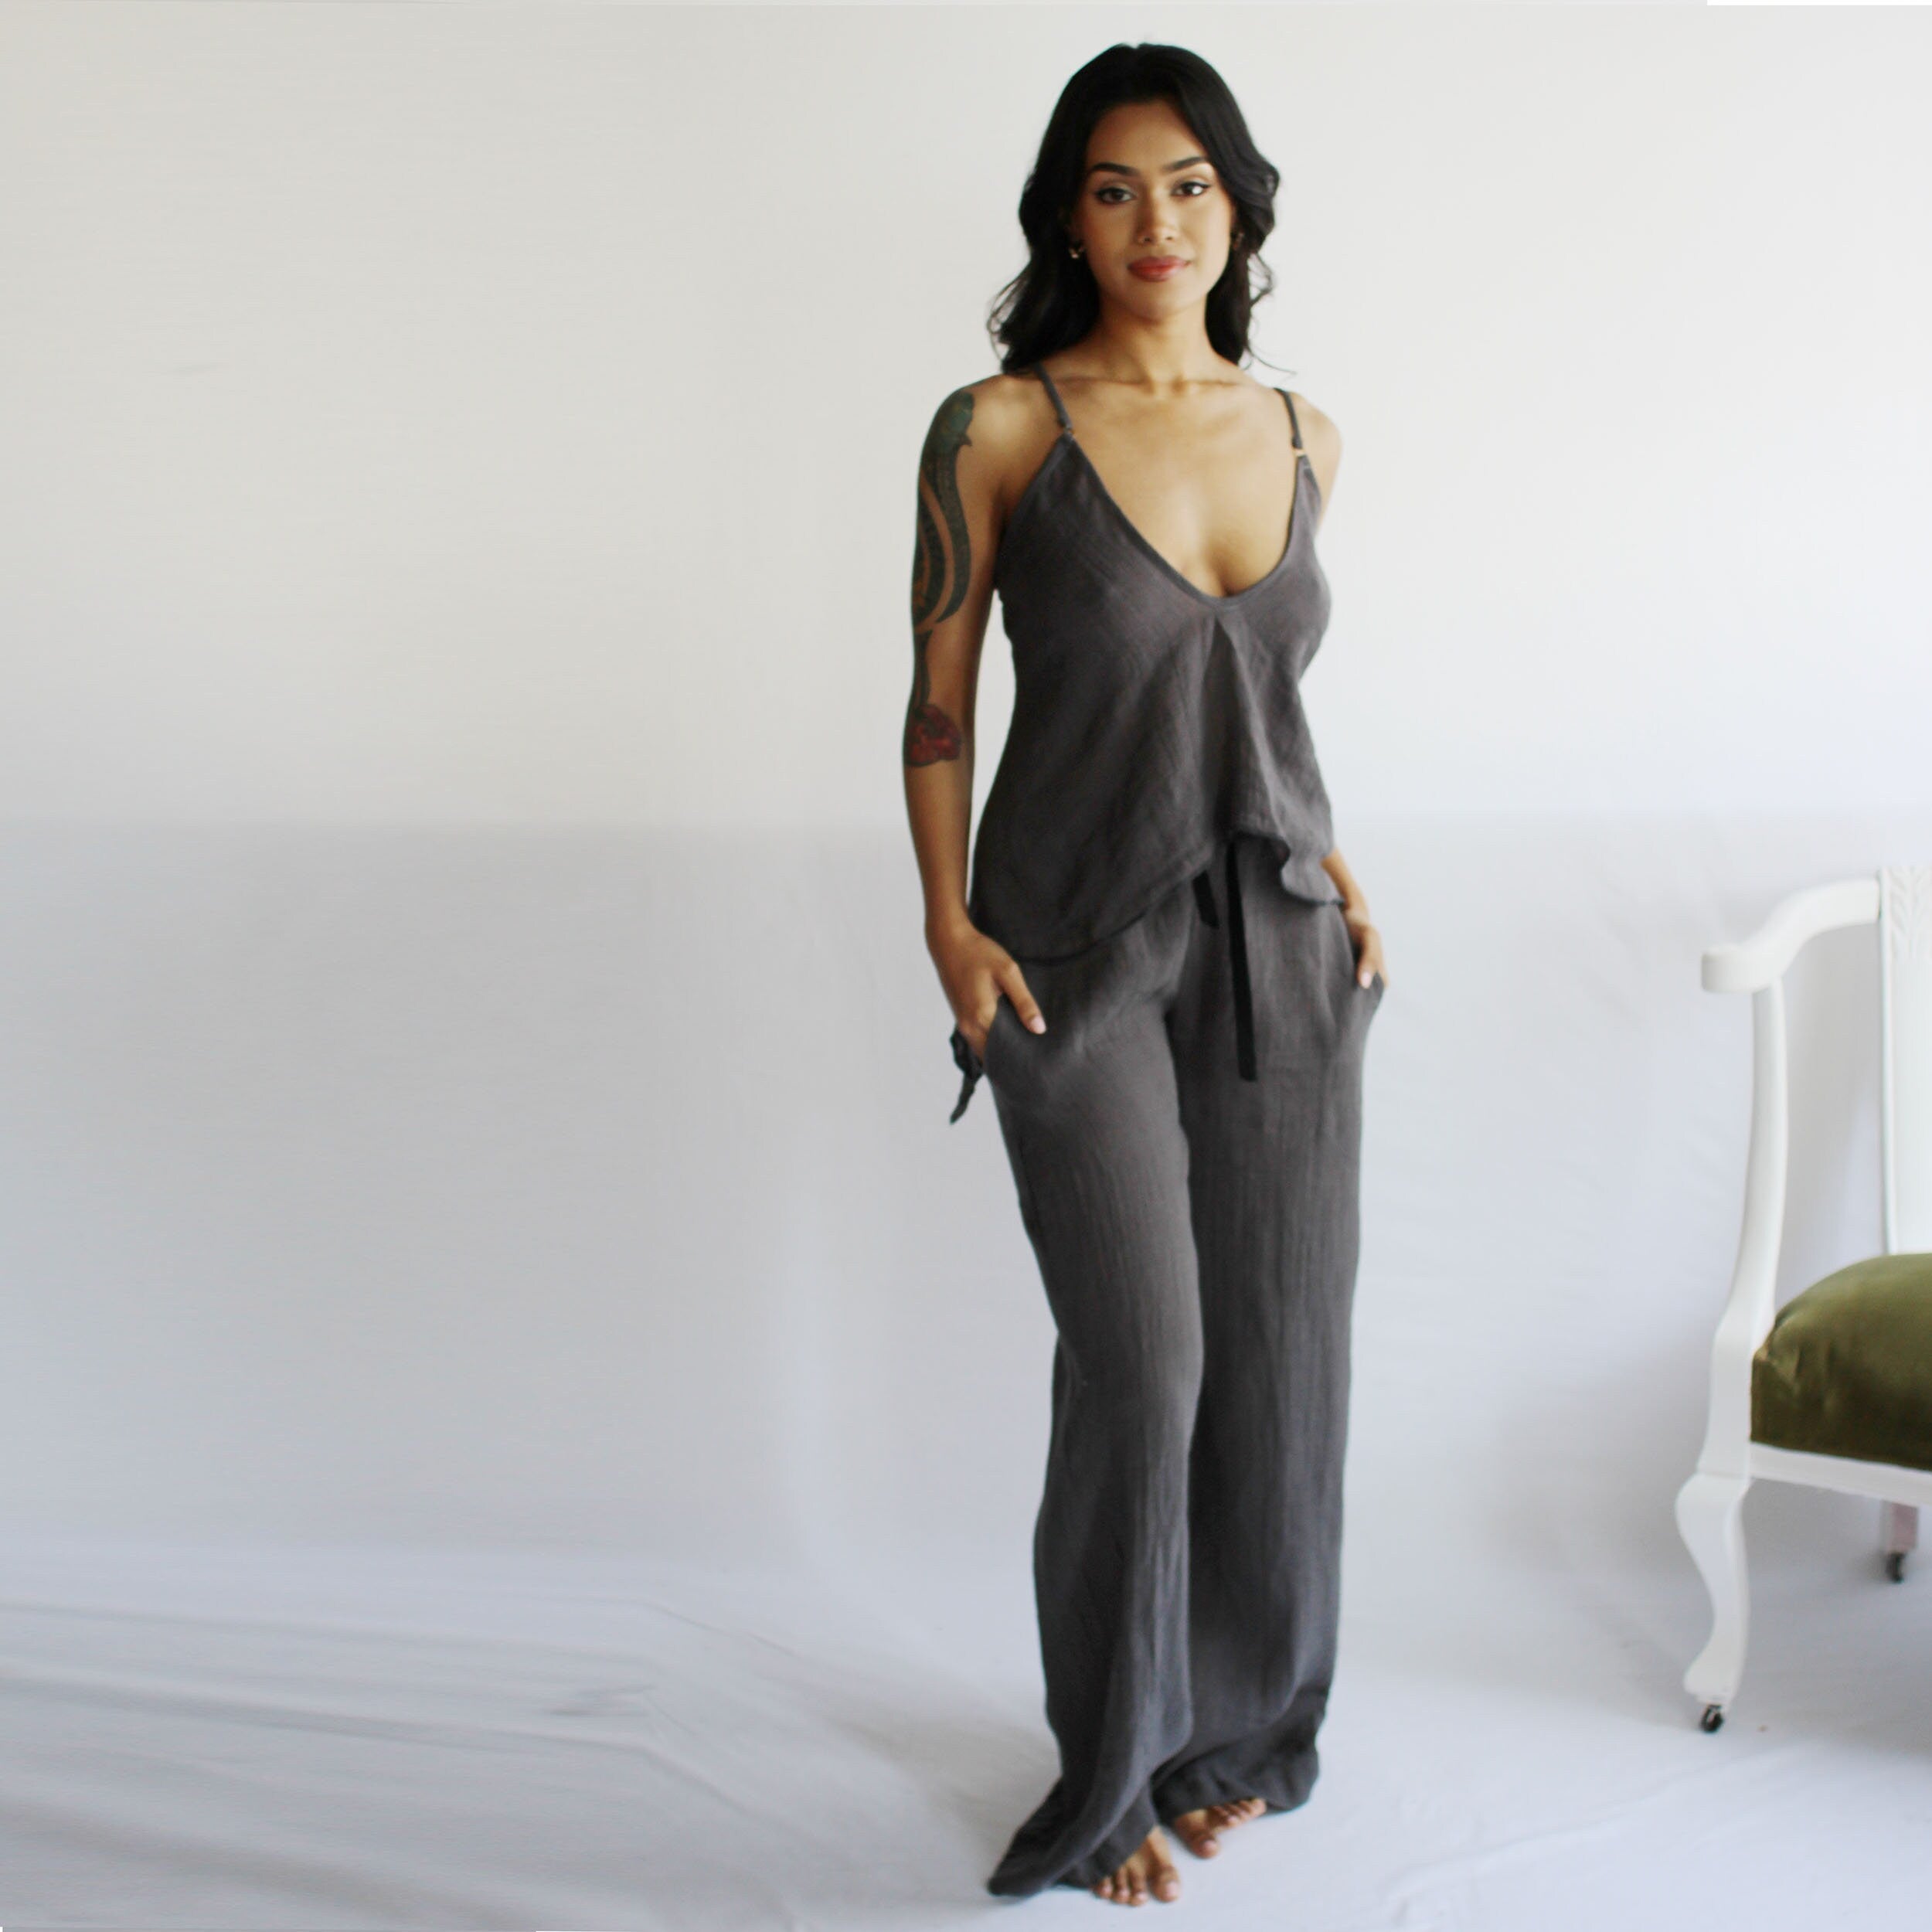 Linen Pajama Set includes Camisole and Drawstring Waist Pants with Pockets, Linen Sleepwear, Ready to Ship, Various Sizes, Charcoal